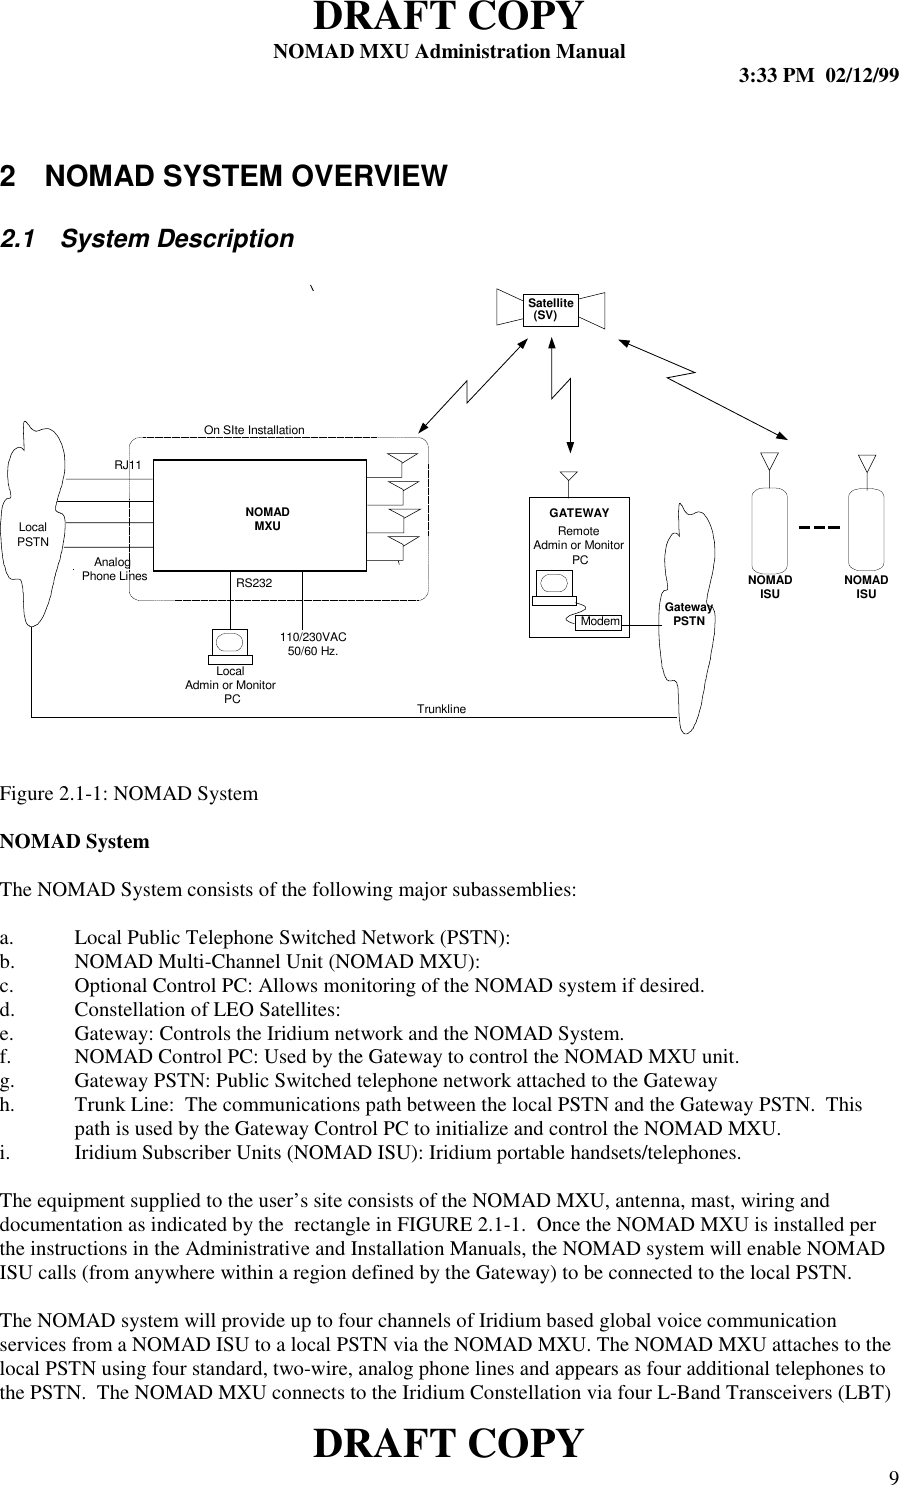 DRAFT COPYNOMAD MXU Administration Manual 3:33 PM  02/12/99DRAFT COPY 92  NOMAD SYSTEM OVERVIEW2.1 System DescriptionFigure 2.1-1: NOMAD SystemNOMAD SystemThe NOMAD System consists of the following major subassemblies:a. Local Public Telephone Switched Network (PSTN):b. NOMAD Multi-Channel Unit (NOMAD MXU):c. Optional Control PC: Allows monitoring of the NOMAD system if desired.d. Constellation of LEO Satellites:e. Gateway: Controls the Iridium network and the NOMAD System.f. NOMAD Control PC: Used by the Gateway to control the NOMAD MXU unit.g. Gateway PSTN: Public Switched telephone network attached to the Gatewayh. Trunk Line:  The communications path between the local PSTN and the Gateway PSTN.  Thispath is used by the Gateway Control PC to initialize and control the NOMAD MXU.i. Iridium Subscriber Units (NOMAD ISU): Iridium portable handsets/telephones.The equipment supplied to the user’s site consists of the NOMAD MXU, antenna, mast, wiring anddocumentation as indicated by the  rectangle in FIGURE 2.1-1.  Once the NOMAD MXU is installed perthe instructions in the Administrative and Installation Manuals, the NOMAD system will enable NOMADISU calls (from anywhere within a region defined by the Gateway) to be connected to the local PSTN.The NOMAD system will provide up to four channels of Iridium based global voice communicationservices from a NOMAD ISU to a local PSTN via the NOMAD MXU. The NOMAD MXU attaches to thelocal PSTN using four standard, two-wire, analog phone lines and appears as four additional telephones tothe PSTN.  The NOMAD MXU connects to the Iridium Constellation via four L-Band Transceivers (LBT)NOMADISURS232GatewayPSTNSatellite(SV)NOMADMXUAnalogPhone LinesLocalPSTNModemGATEWAYRJ11110/230VAC50/60 Hz.On SIte InstallationTrunklineLocalAdmin or Monitor PCRemoteAdmin or Monitor PCNOMADISU